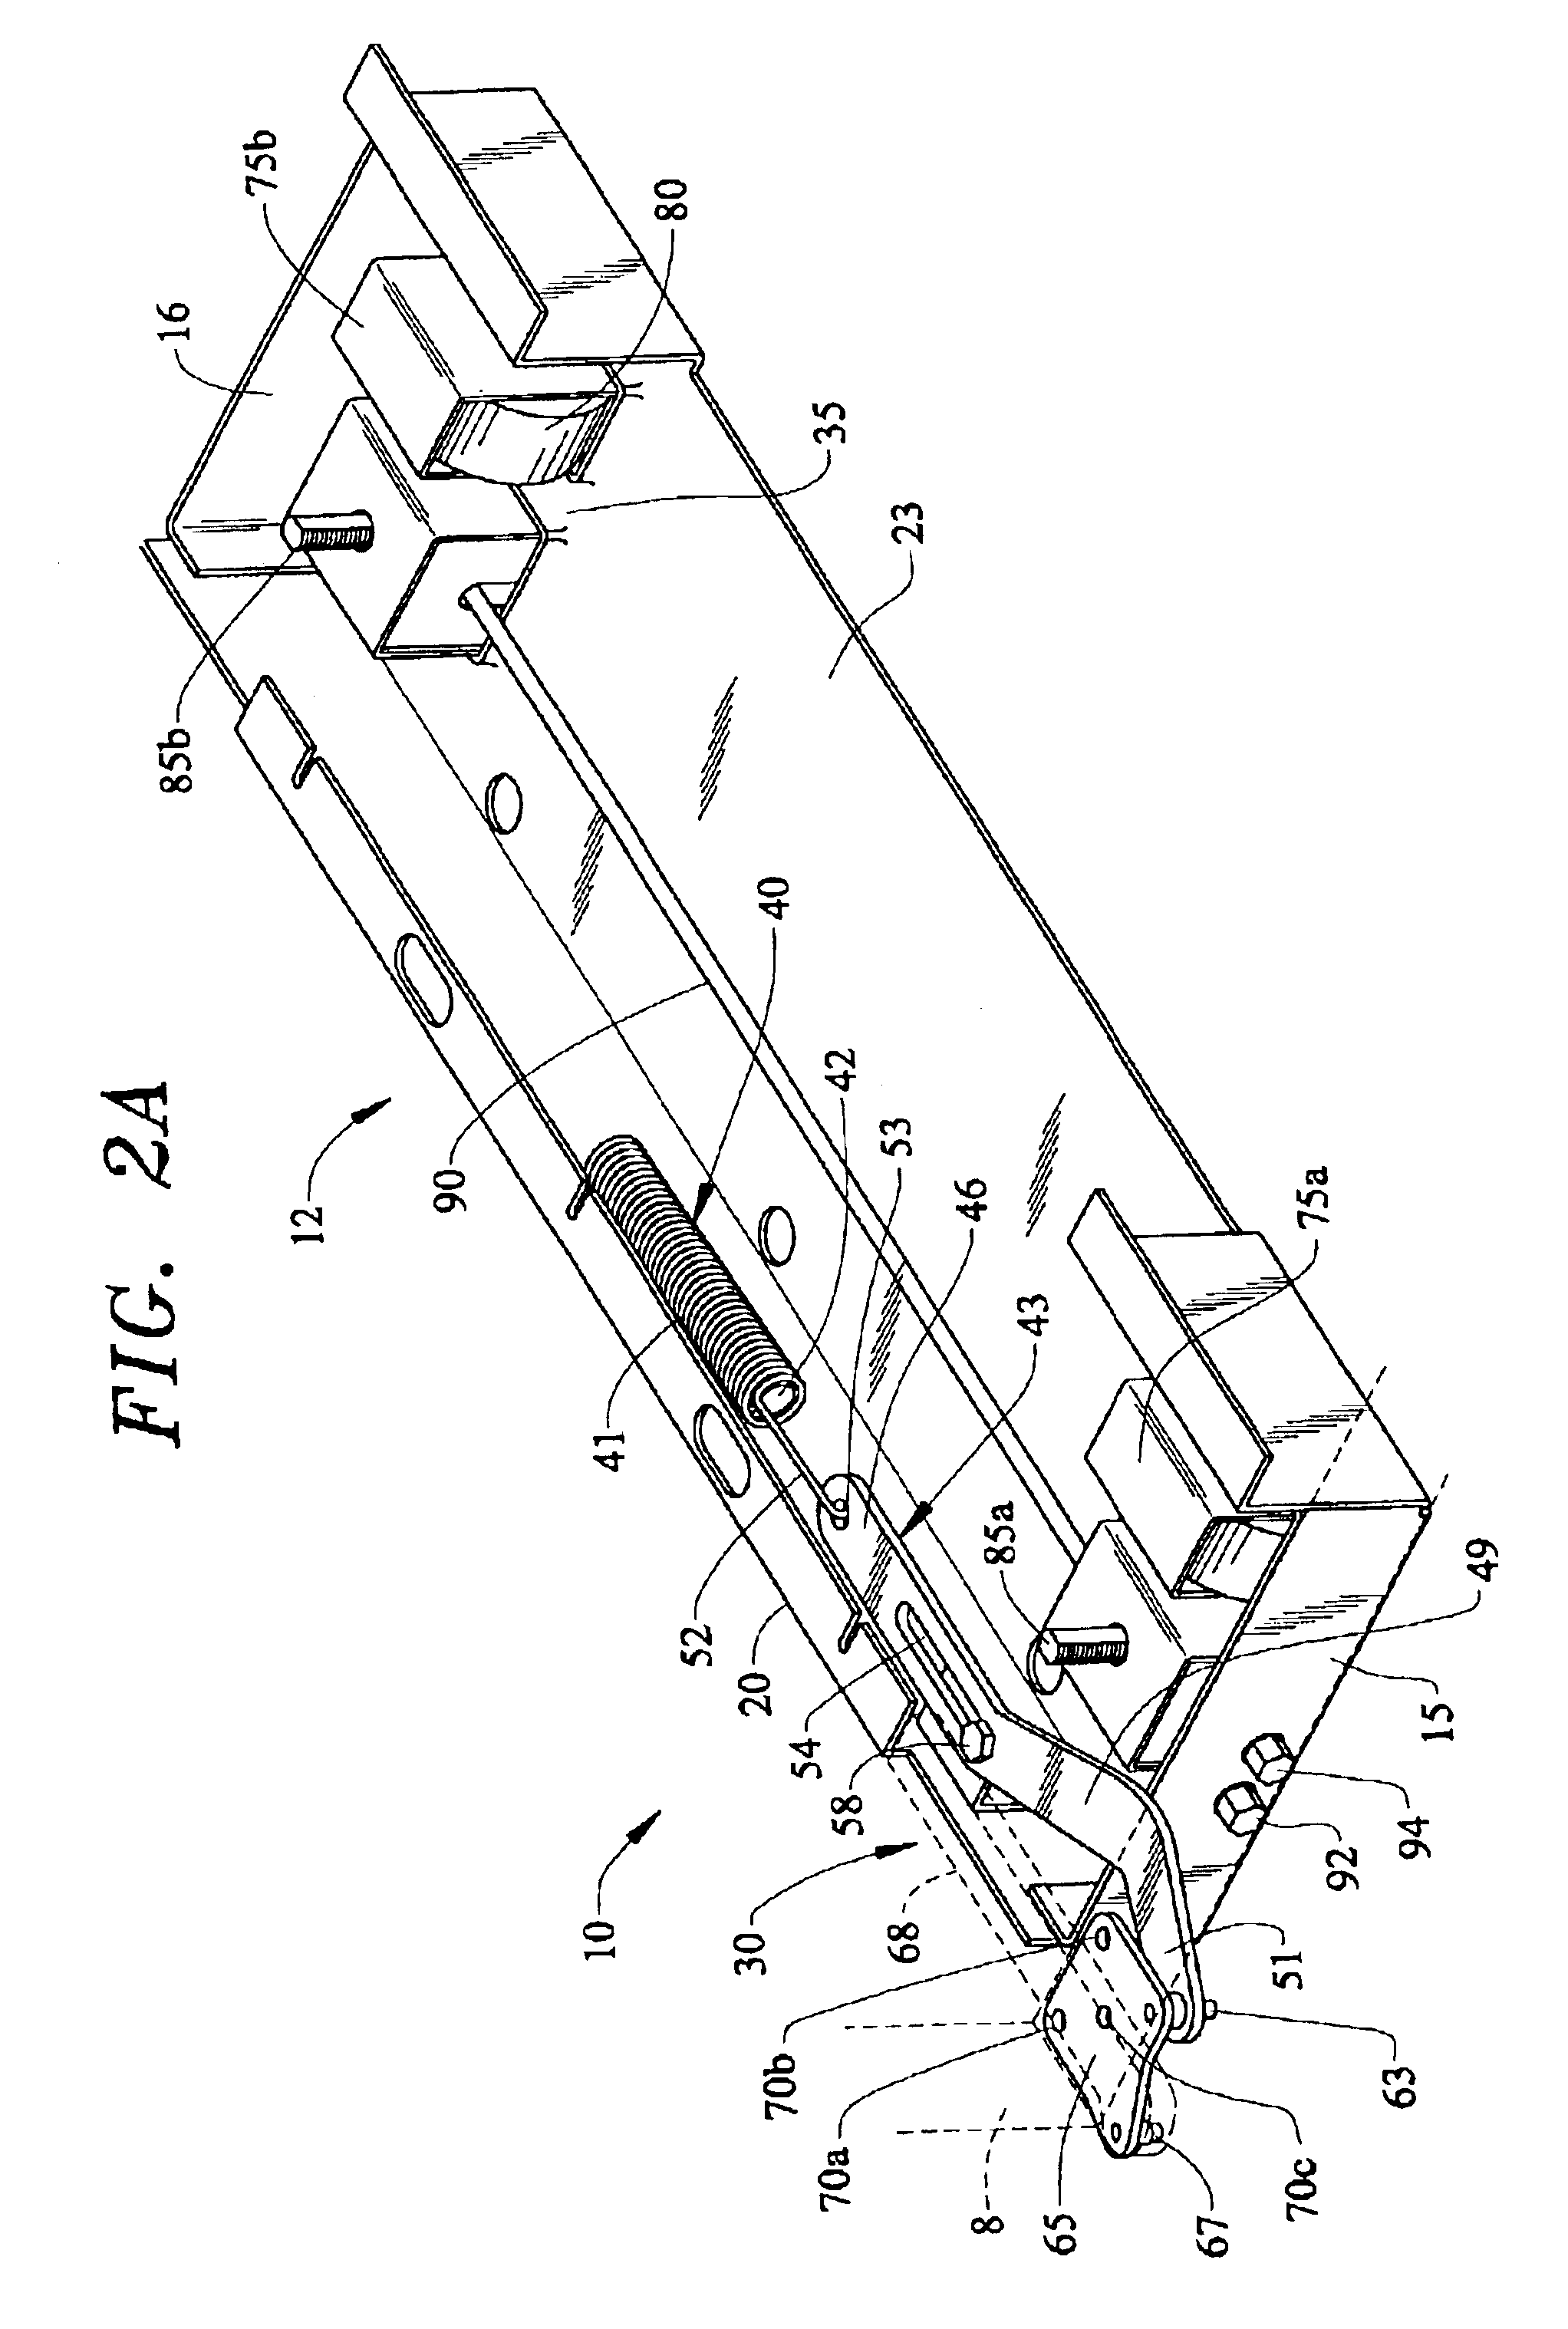 Integrated refrigerator cabinet leveling and door closing assembly